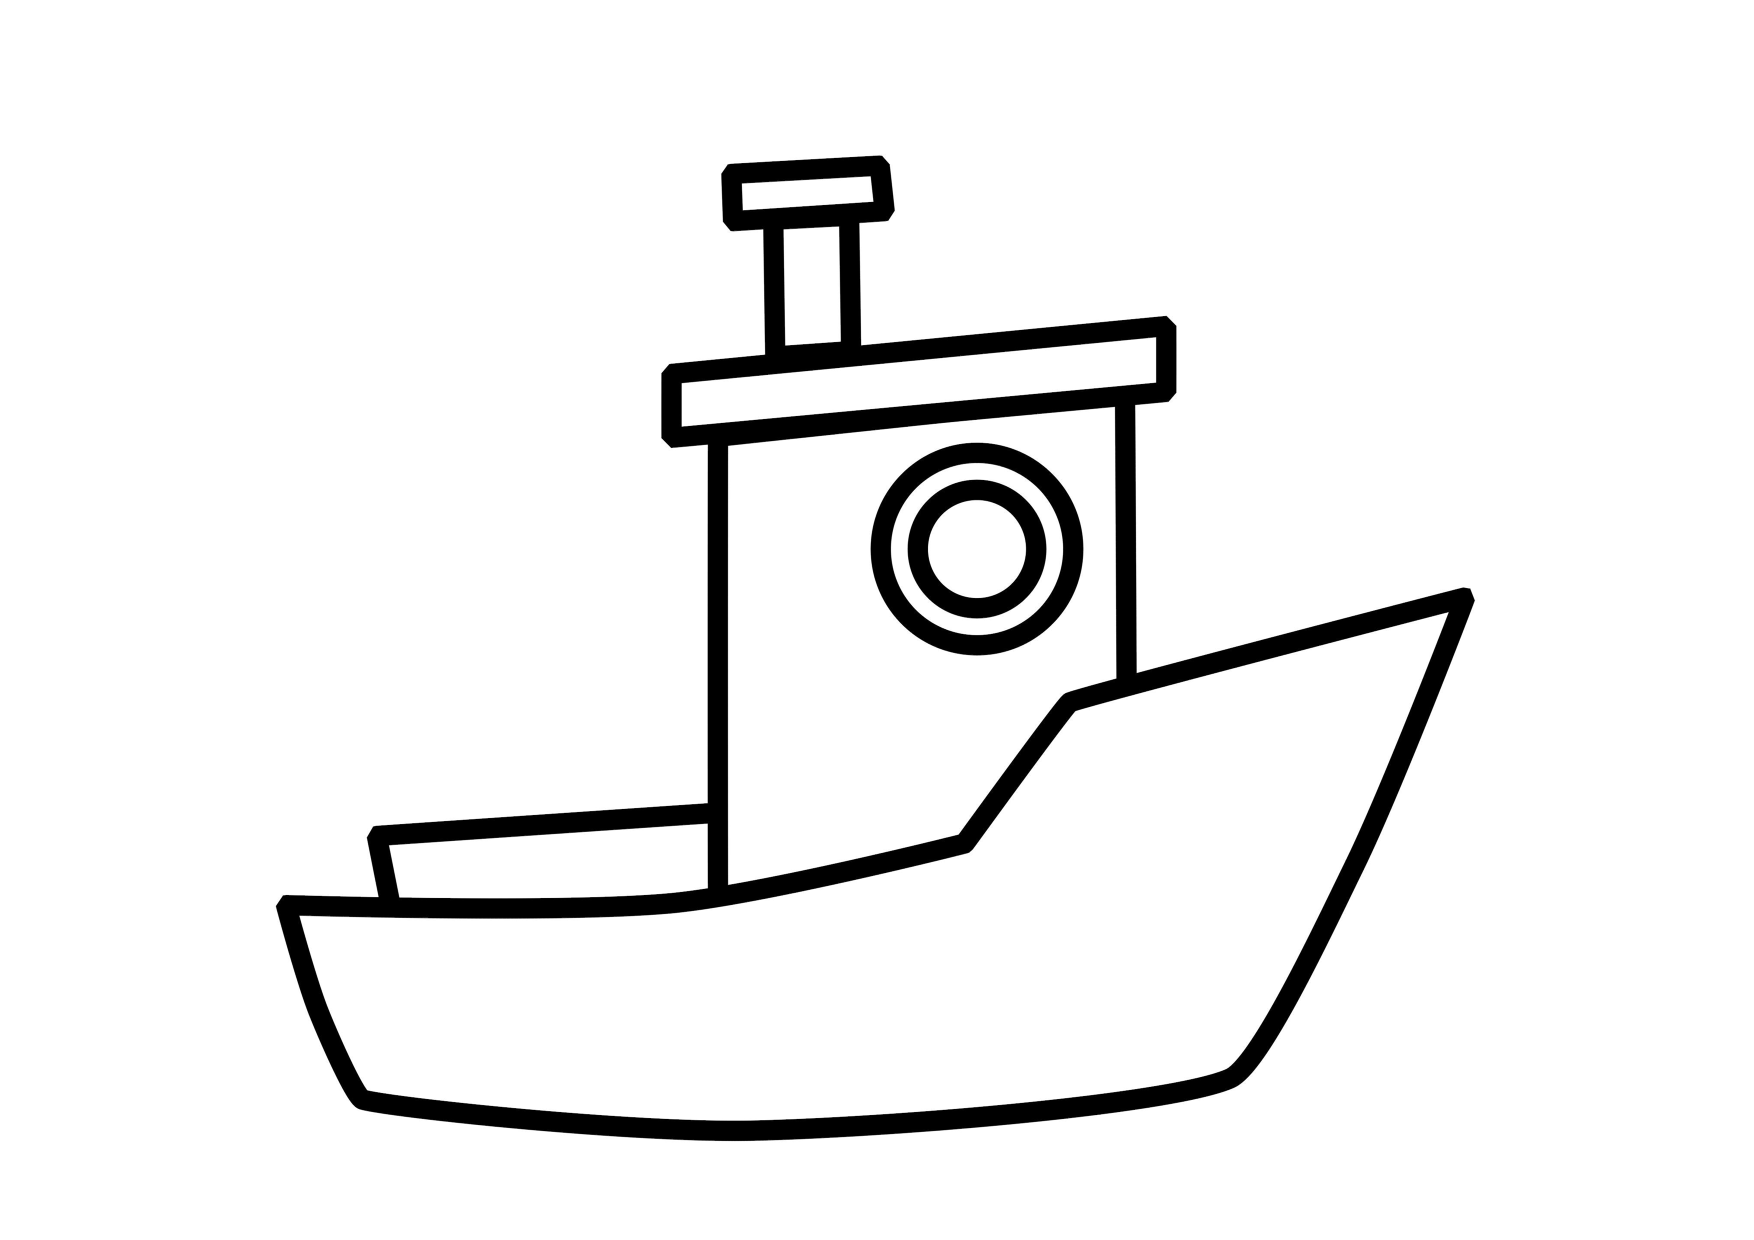 Download collection of boat coloring pages for kids home worksheets for preschool boys and girls youâ coloring pages coloring book pages kids coloring book